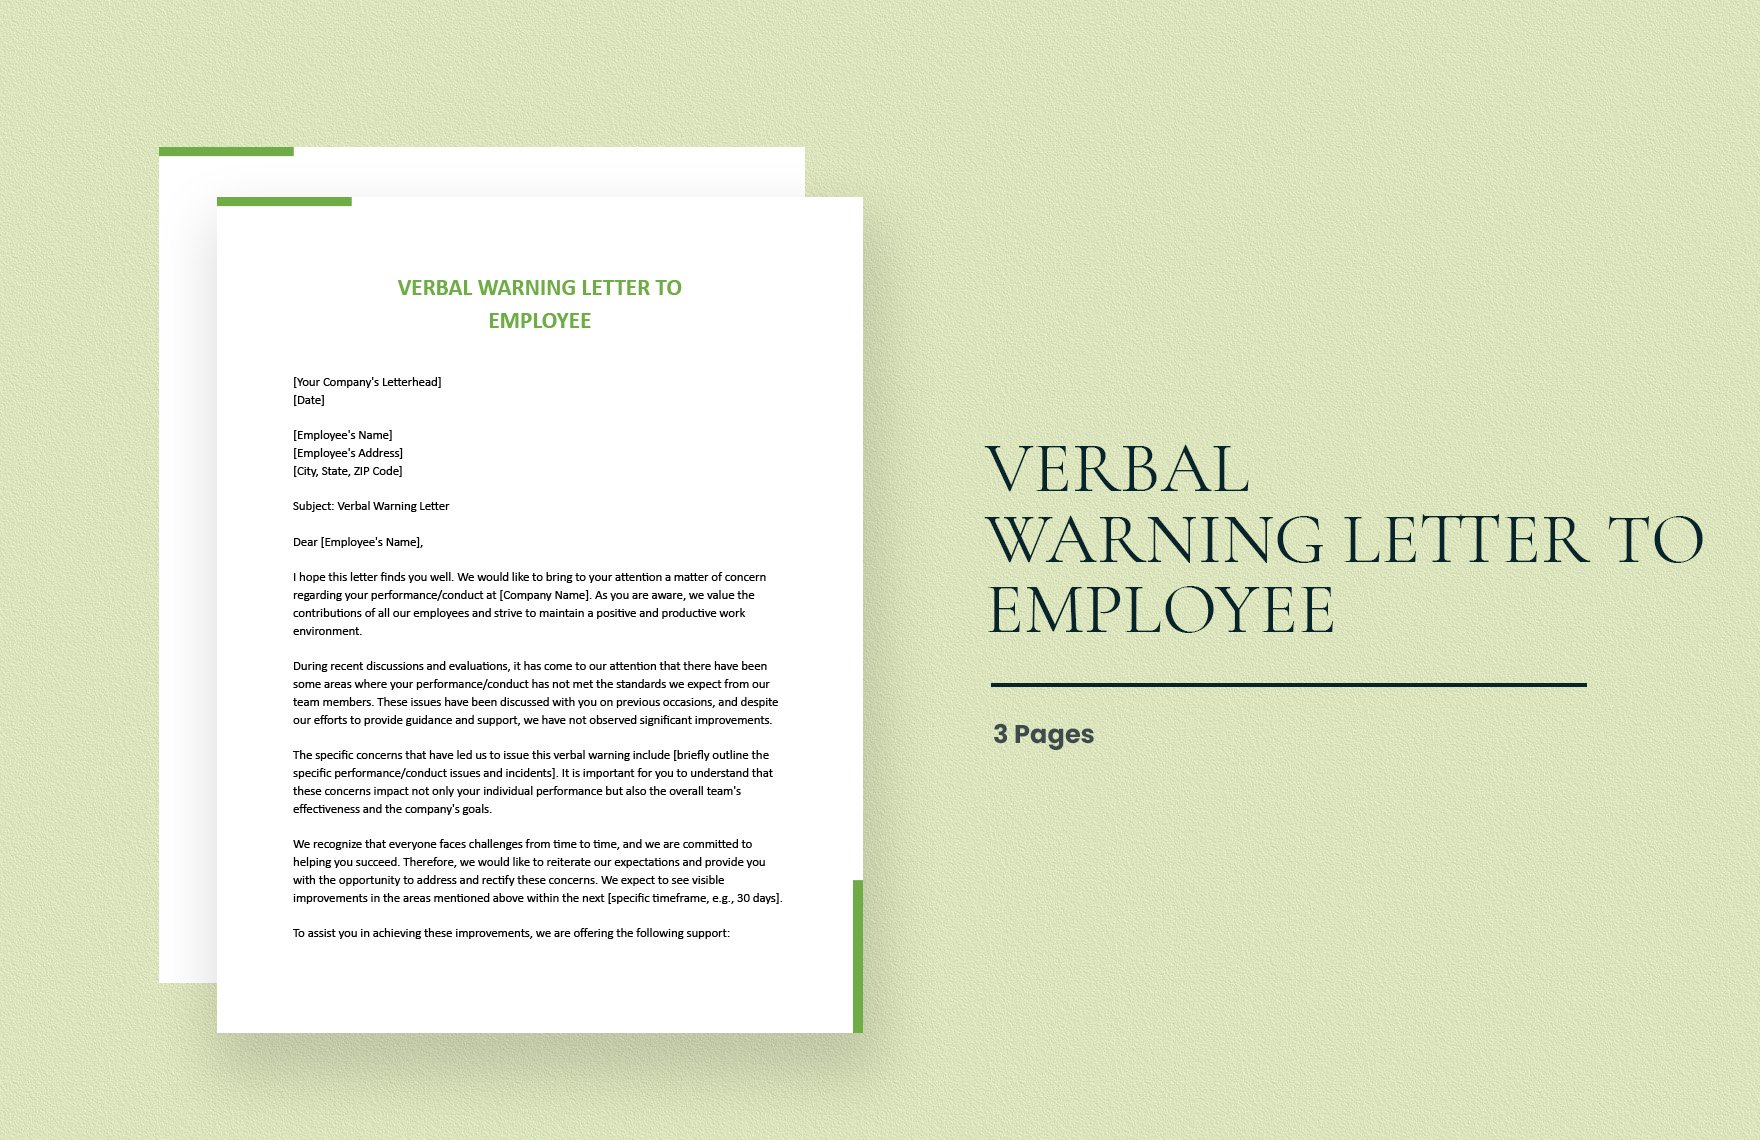 Verbal Warning Letter To Employee